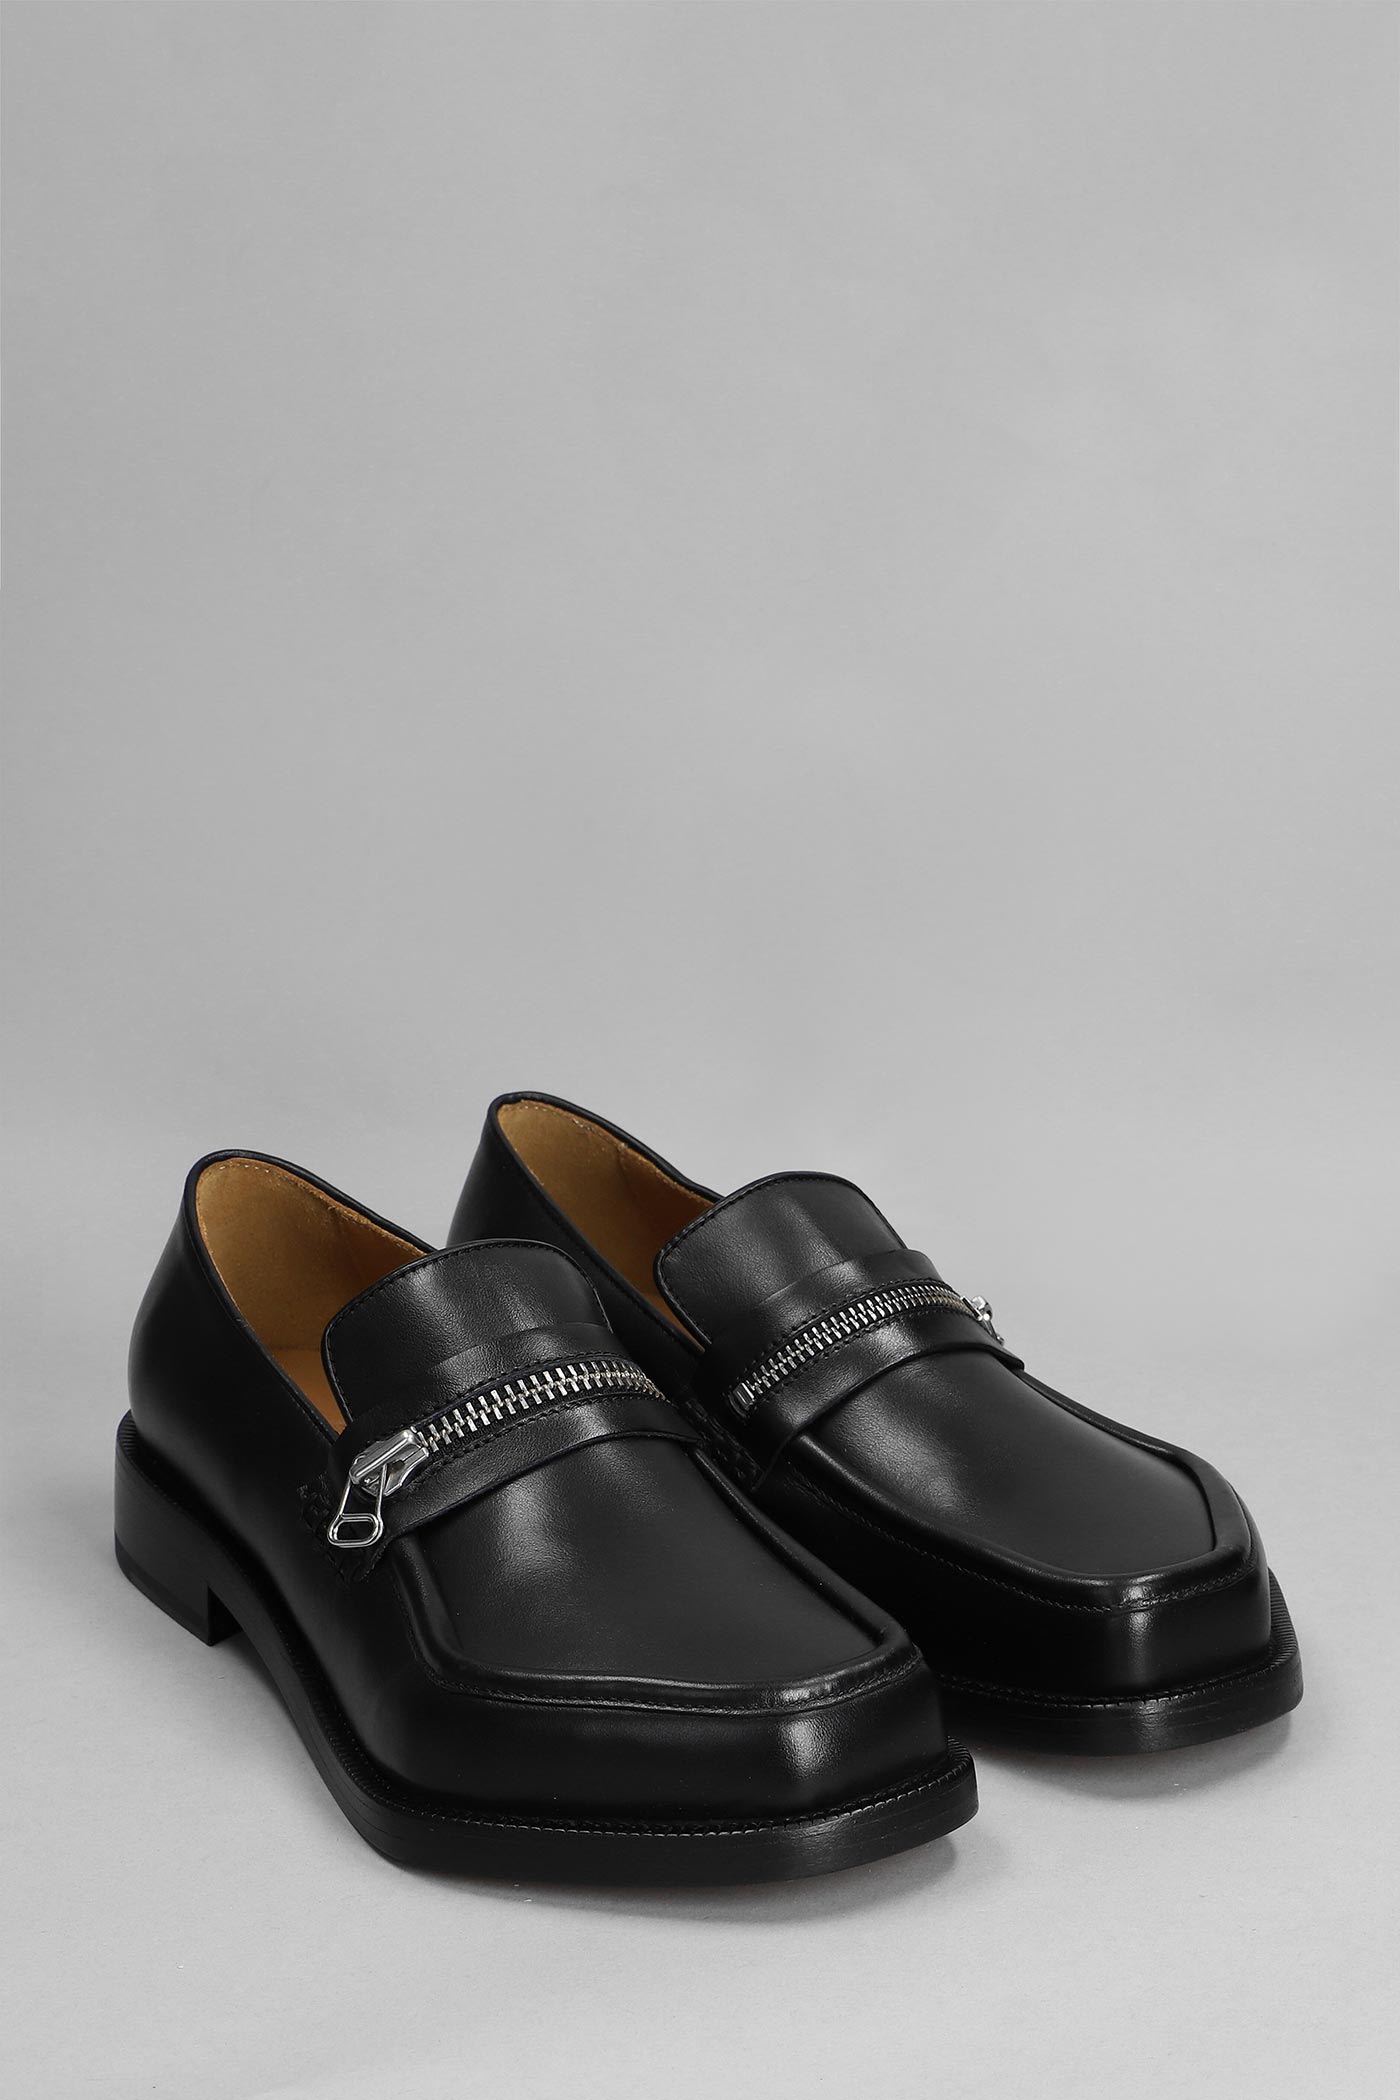 Magliano Brown Monster Loafers | Smart Closet